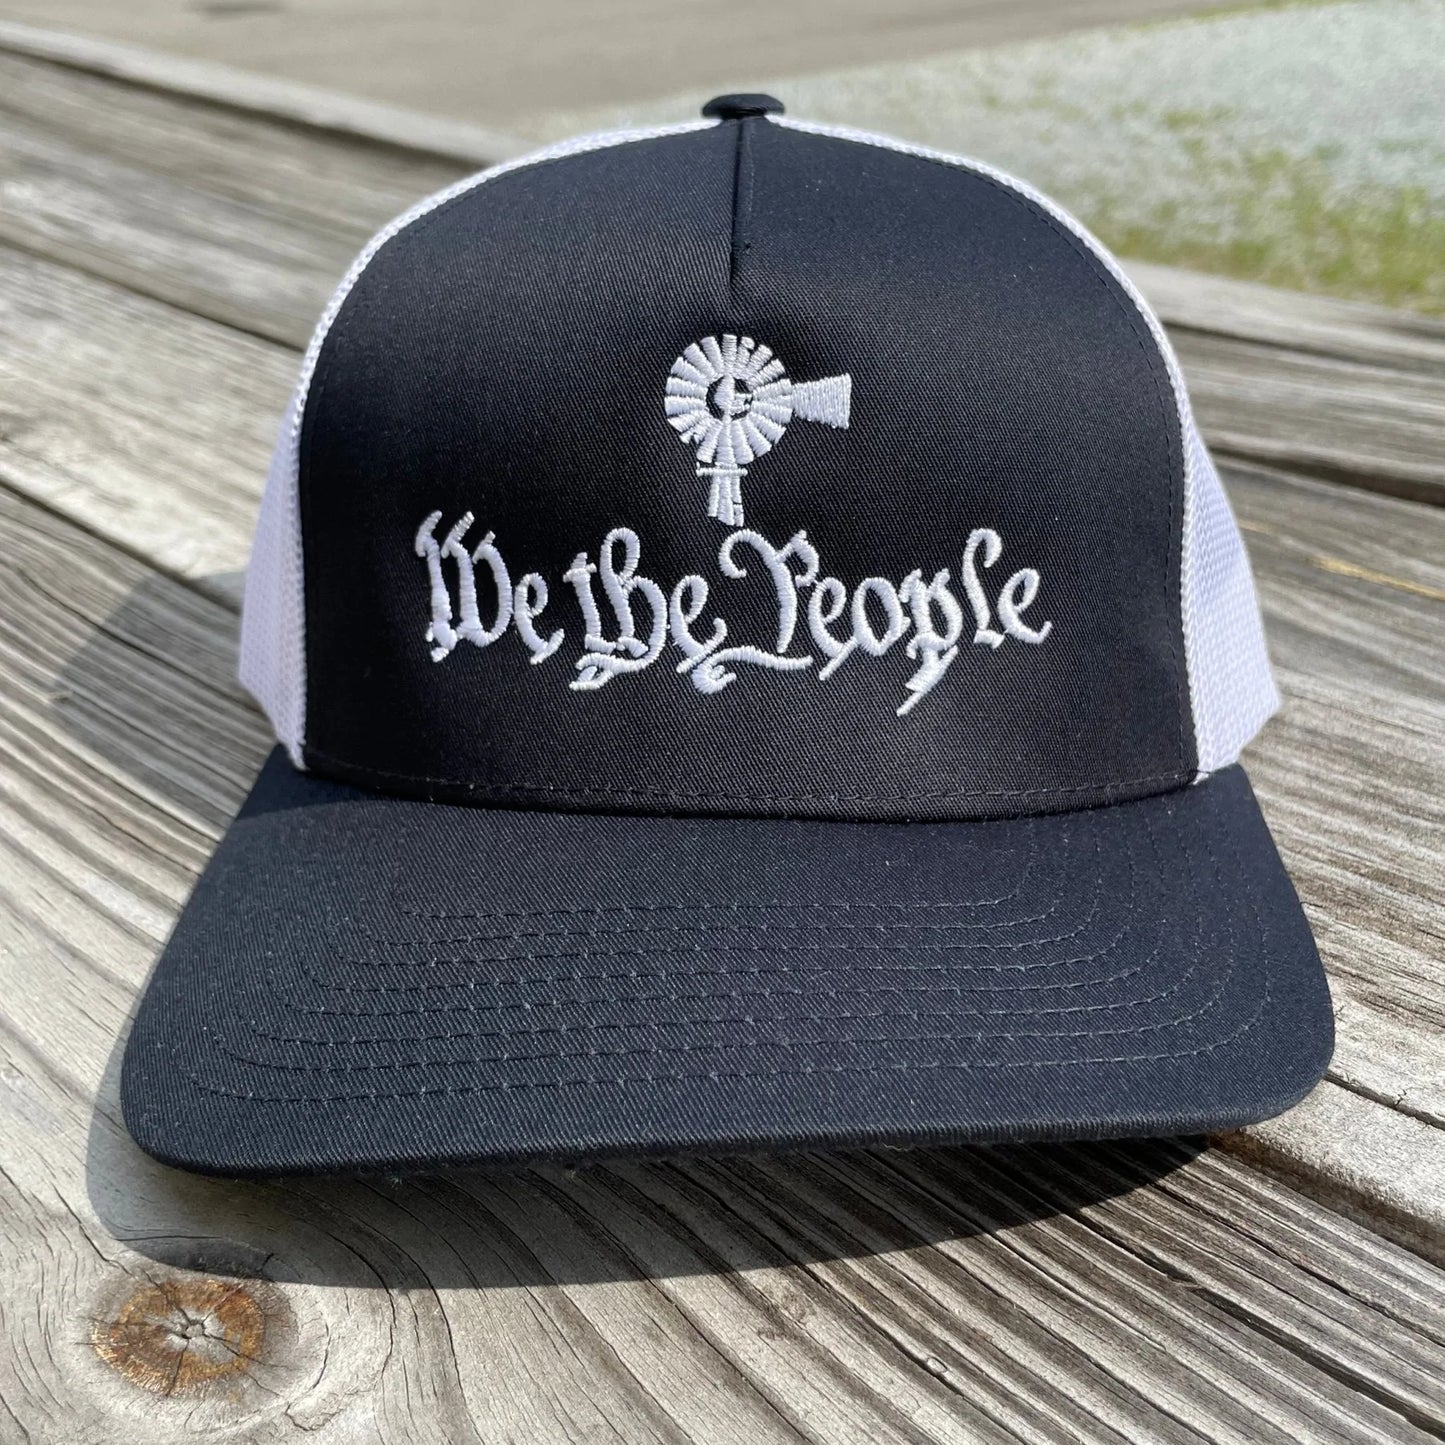 Old South We the People - Trucker Hat